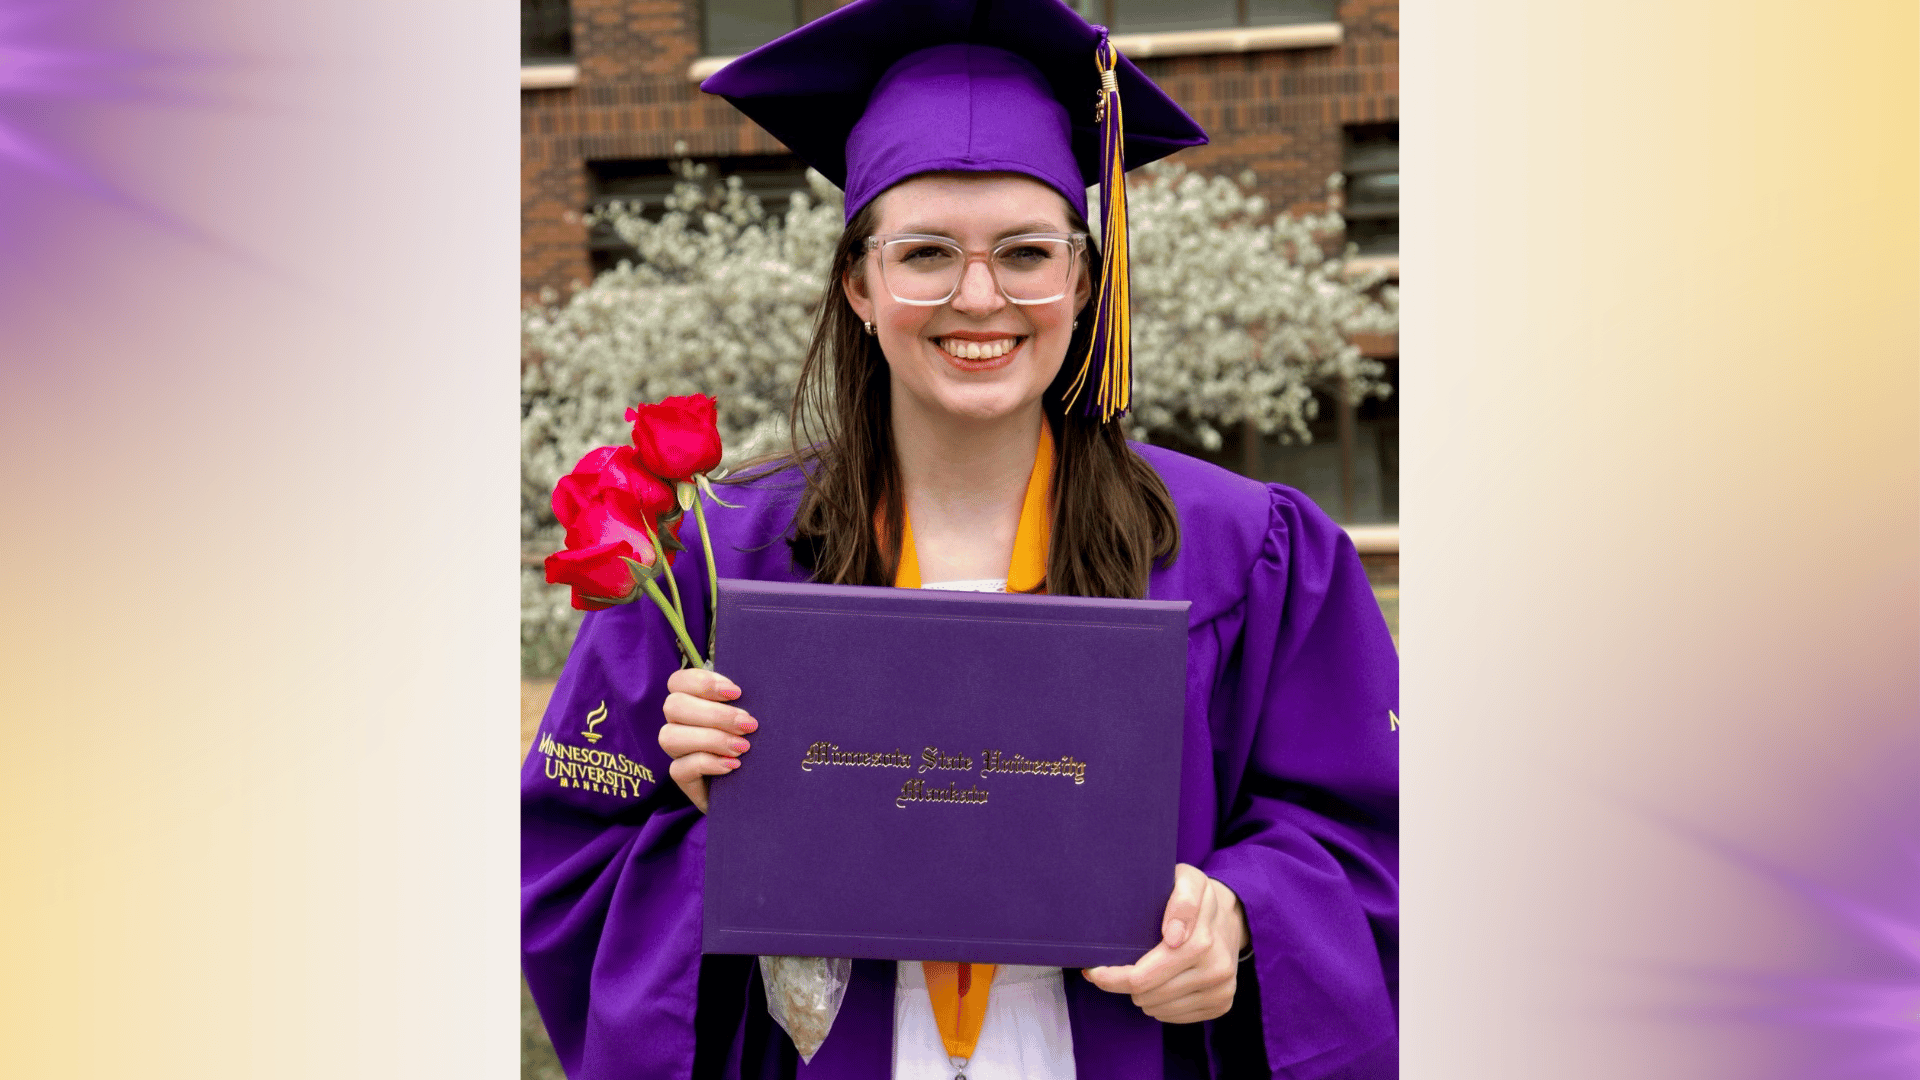 a person in a graduation gown holding a diploma and flowers